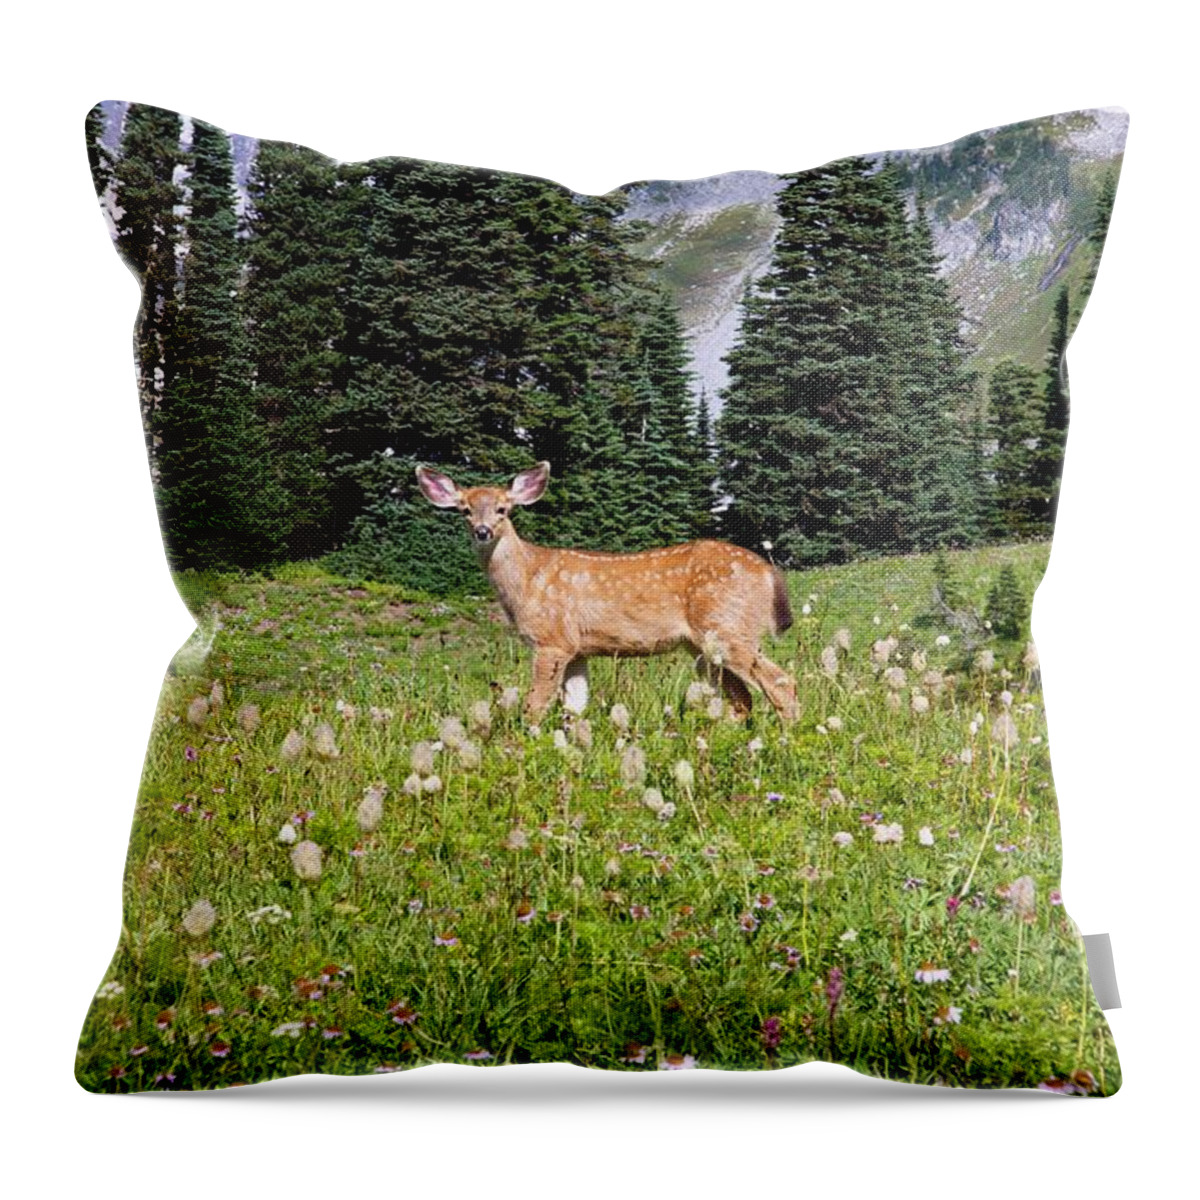 Alertness Throw Pillow featuring the photograph Deer Cervidae In Paradise Park In Mt by Design Pics / Craig Tuttle